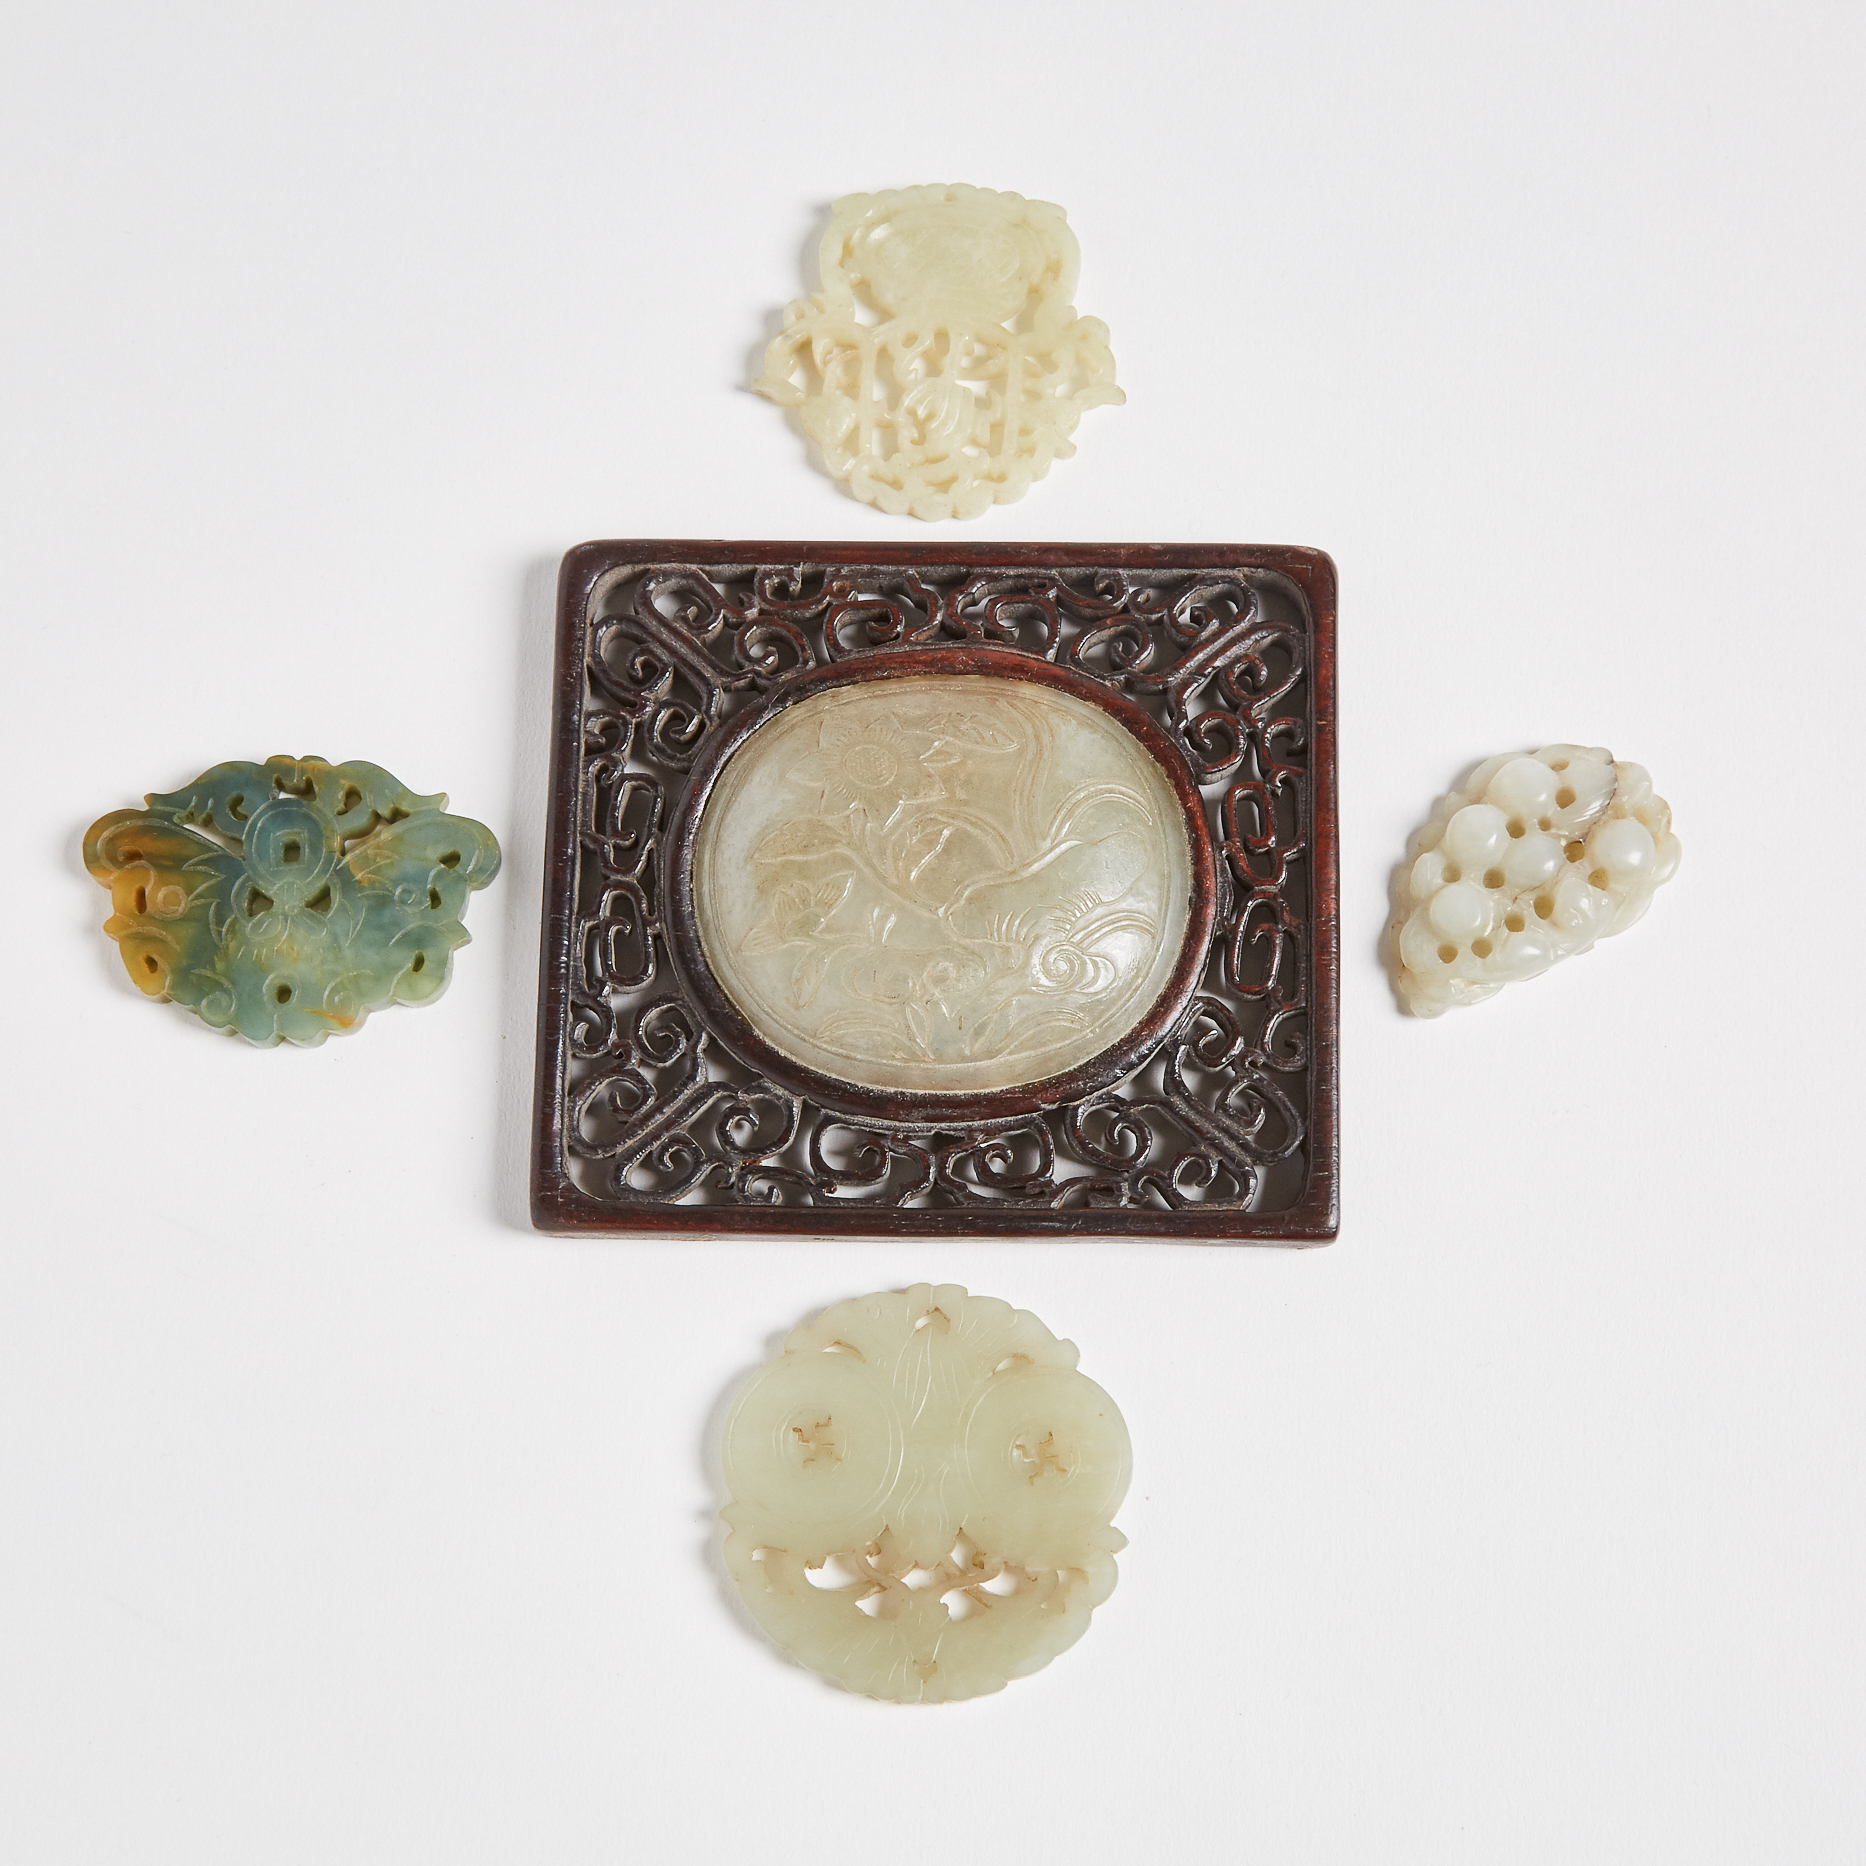 A Group of Five Jade Carved Plaques